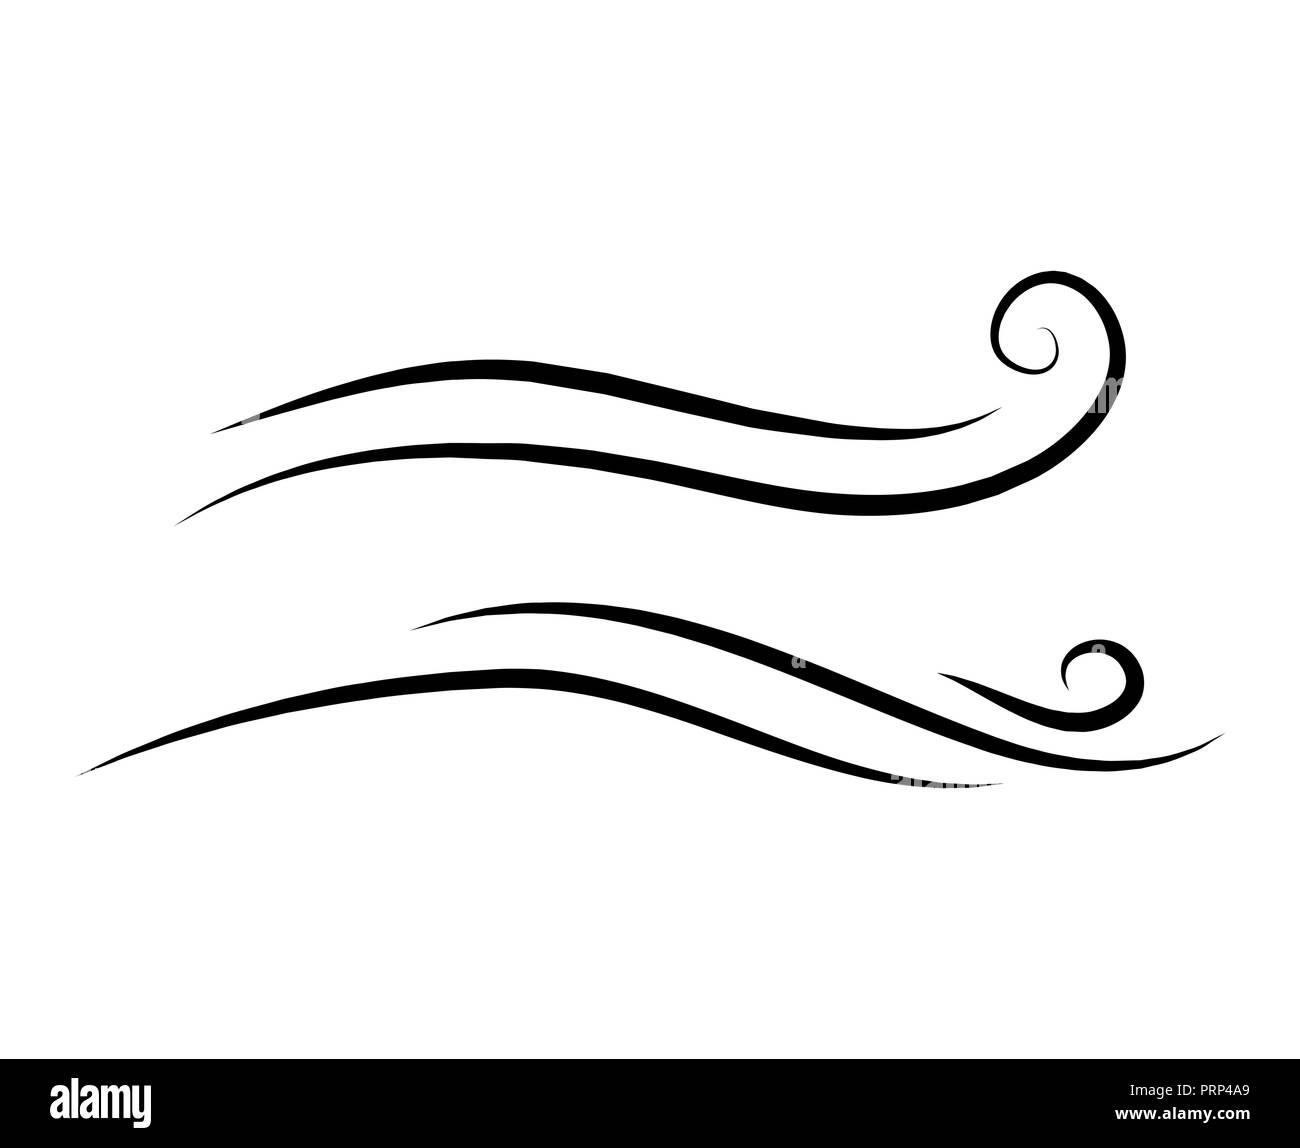 Windy day and man isolated Royalty Free Vector Image